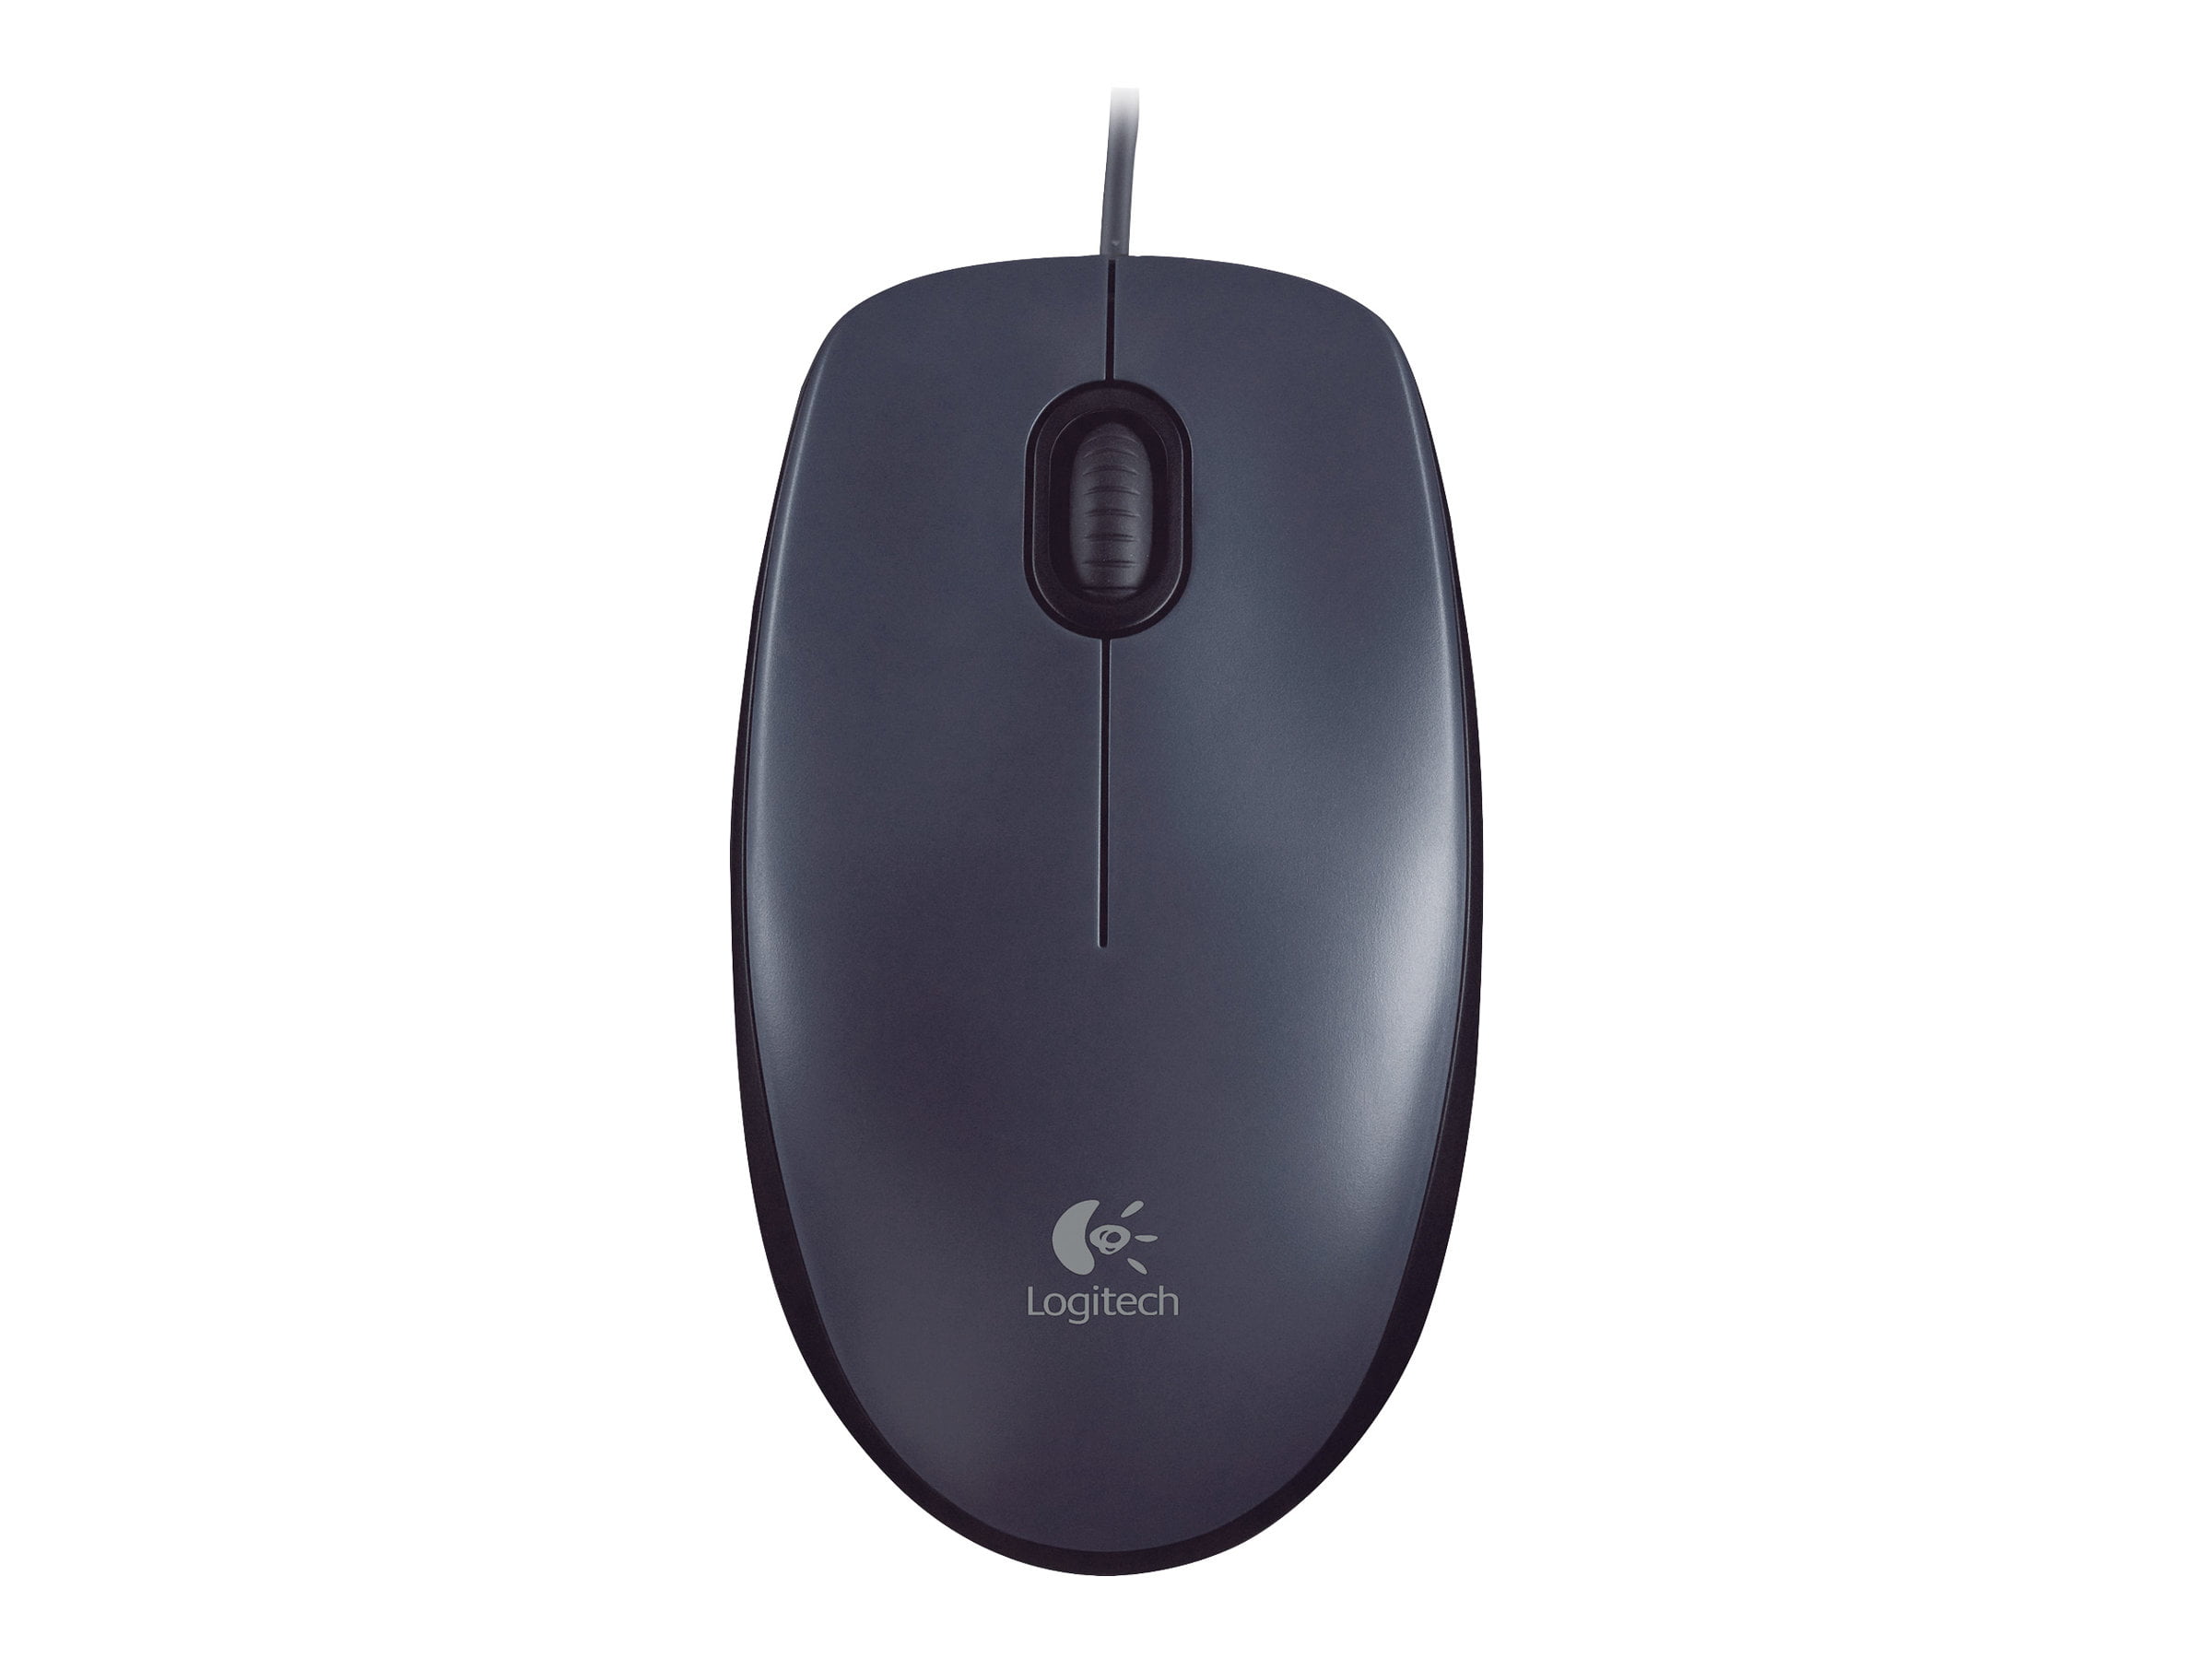 Logitech M90 USB Wired Optical for Mouse Size Laptop smooth Mac moverL PC 1000 Full DPI Comfort